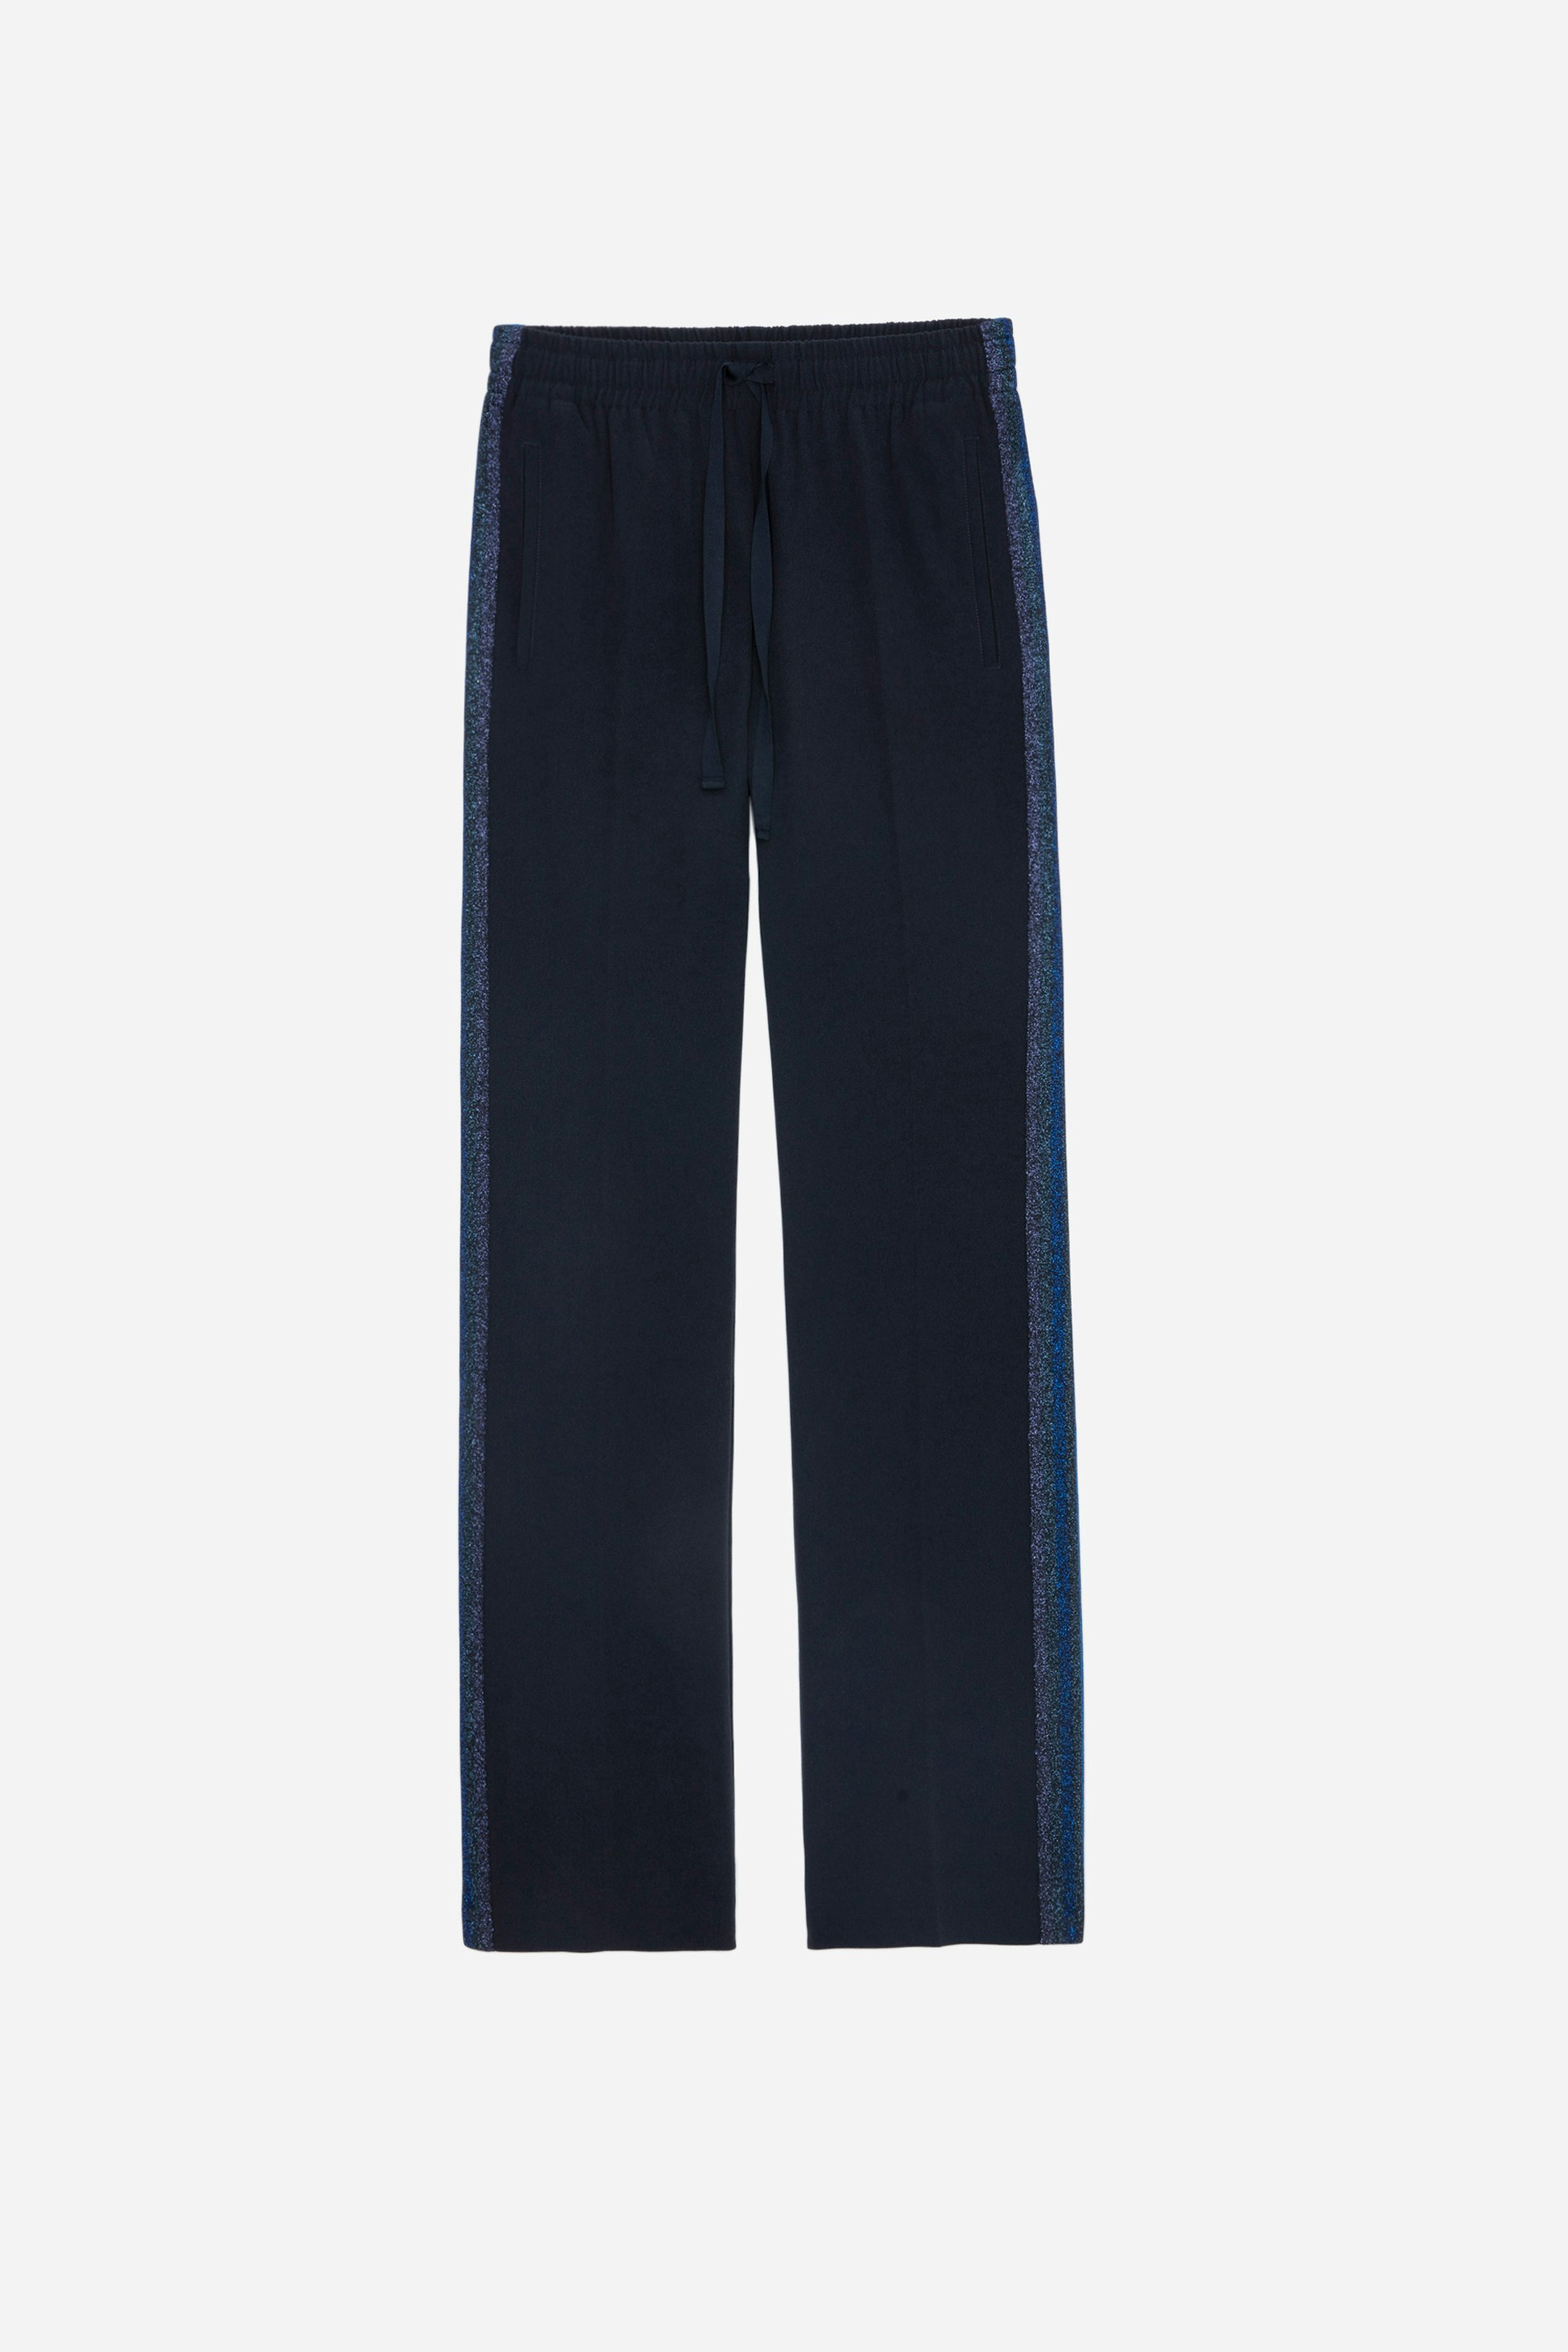 Pomy Pants - Women’s navy blue crepe pants with glittery side bands